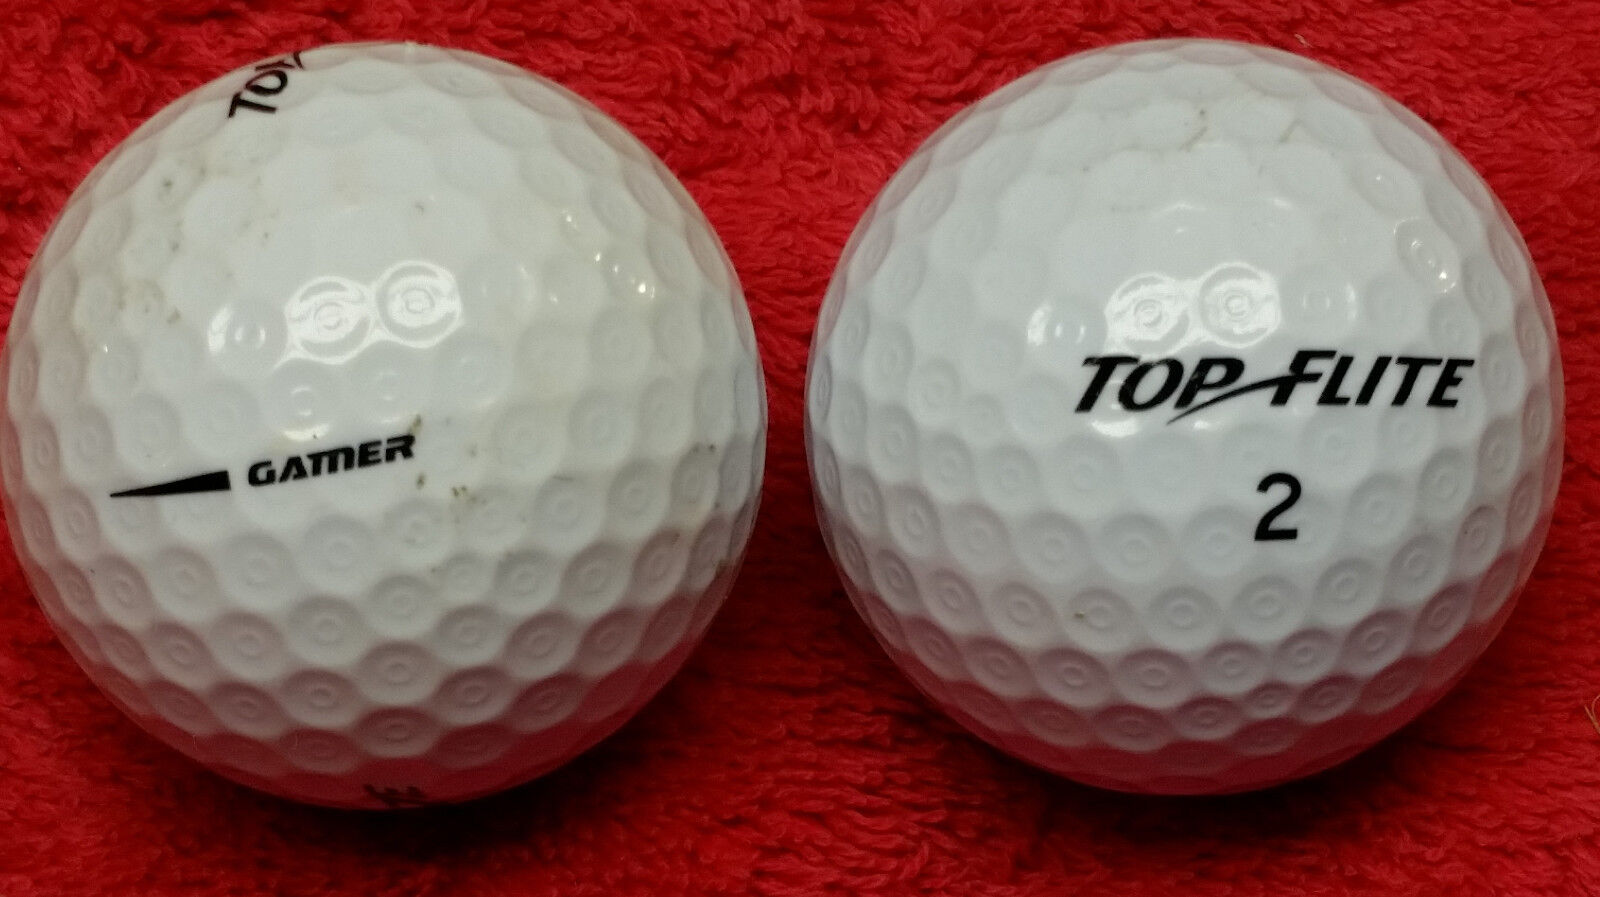 24 Top Flite Gamer AAAAA golf balls $22.00 with ship includes Gamer Tour and V2